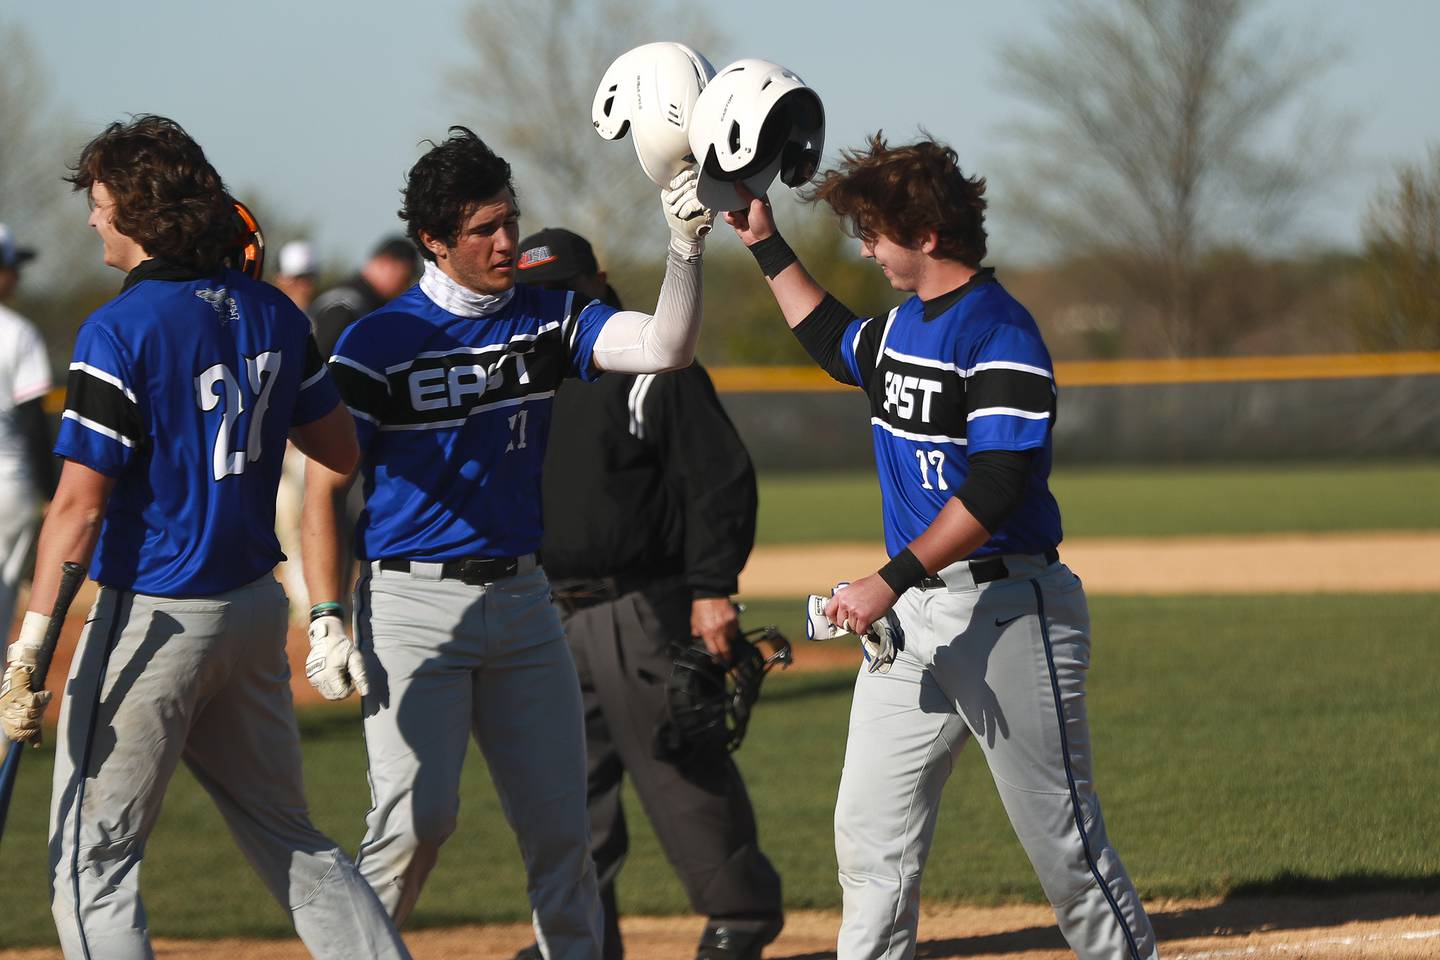 Lincoln-Way East's Randy Seymour (center) and Jake Petak (right) bump helmets after scoring on Friday, April 30, 2021, at Lincoln-Way West High School in New Lenox, Ill.